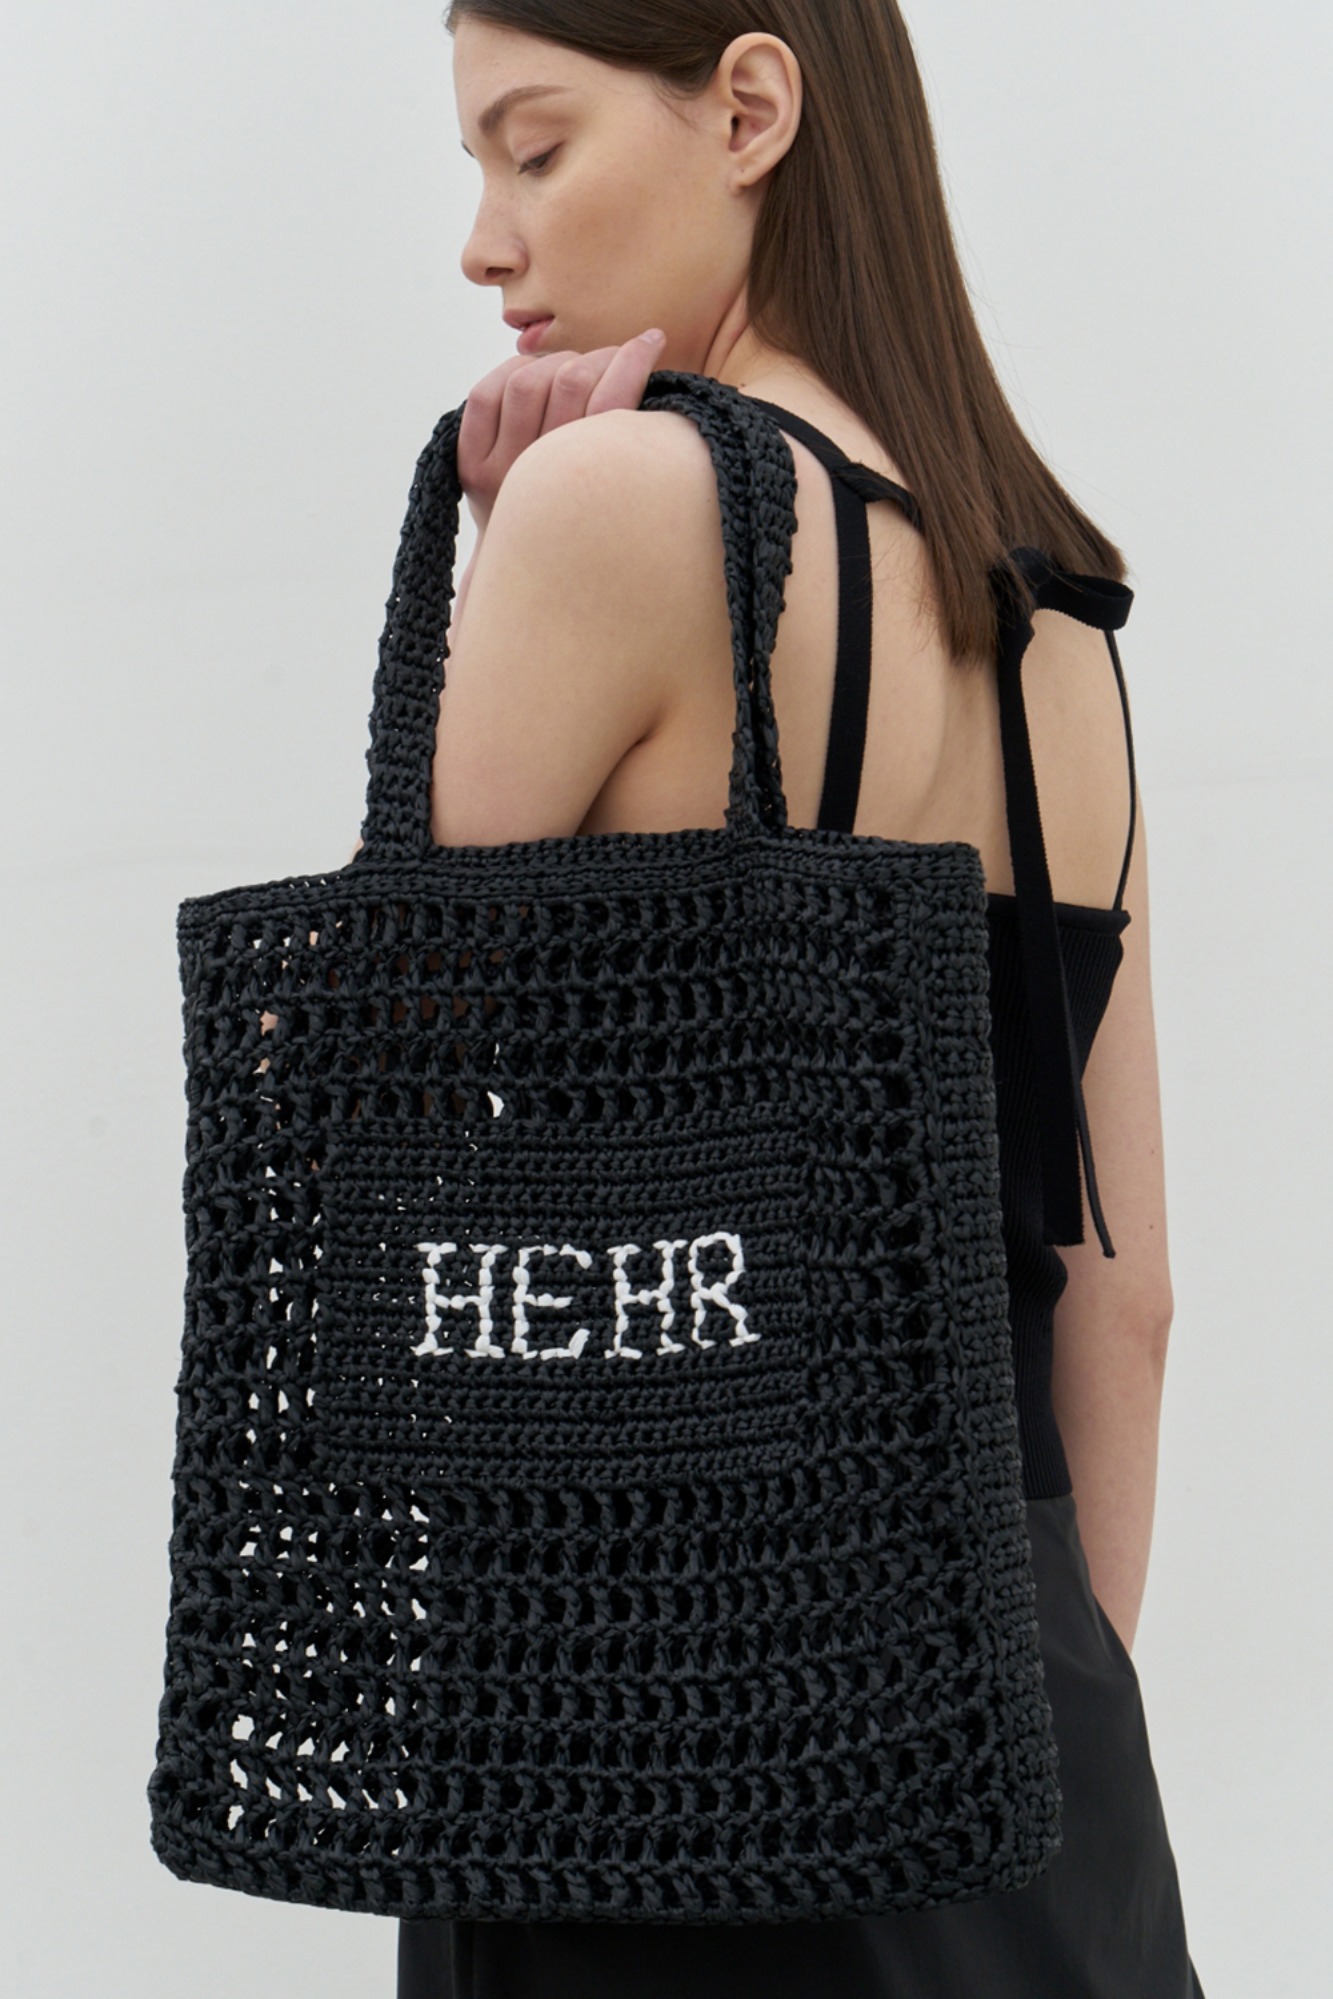 Knot Net Tote Bag